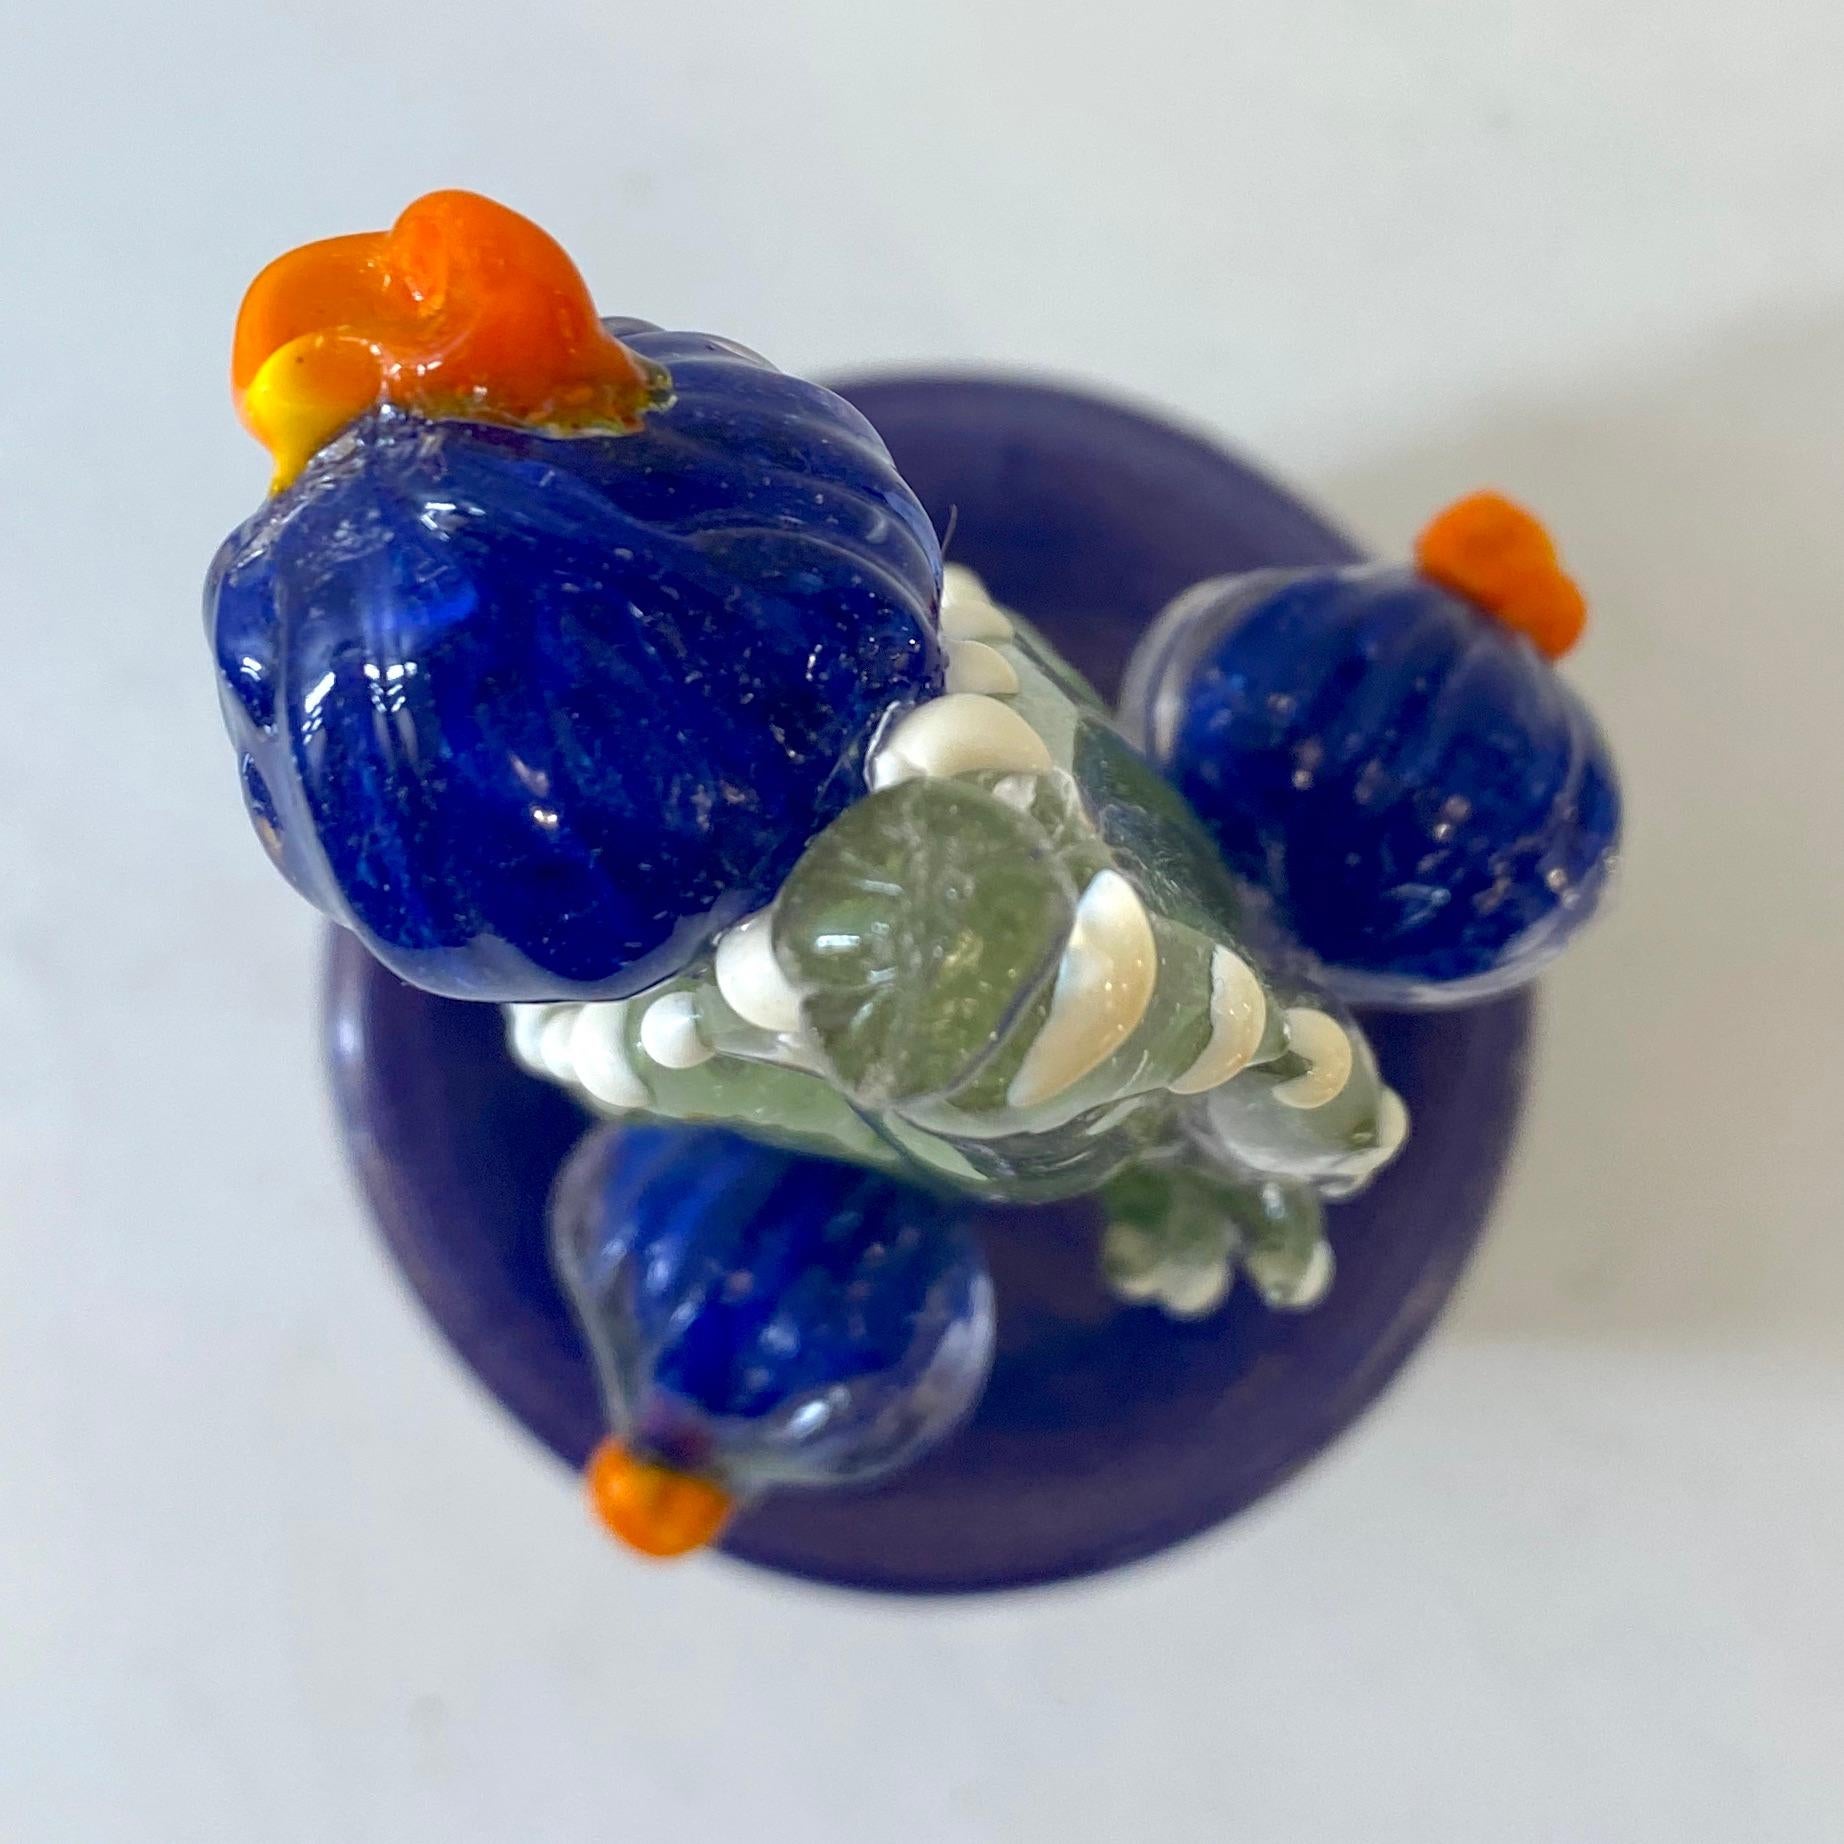 Organic Modern 2000s Italian Moss Green Gold Murano Art Glass Cactus Plant with Blue Flowers  For Sale